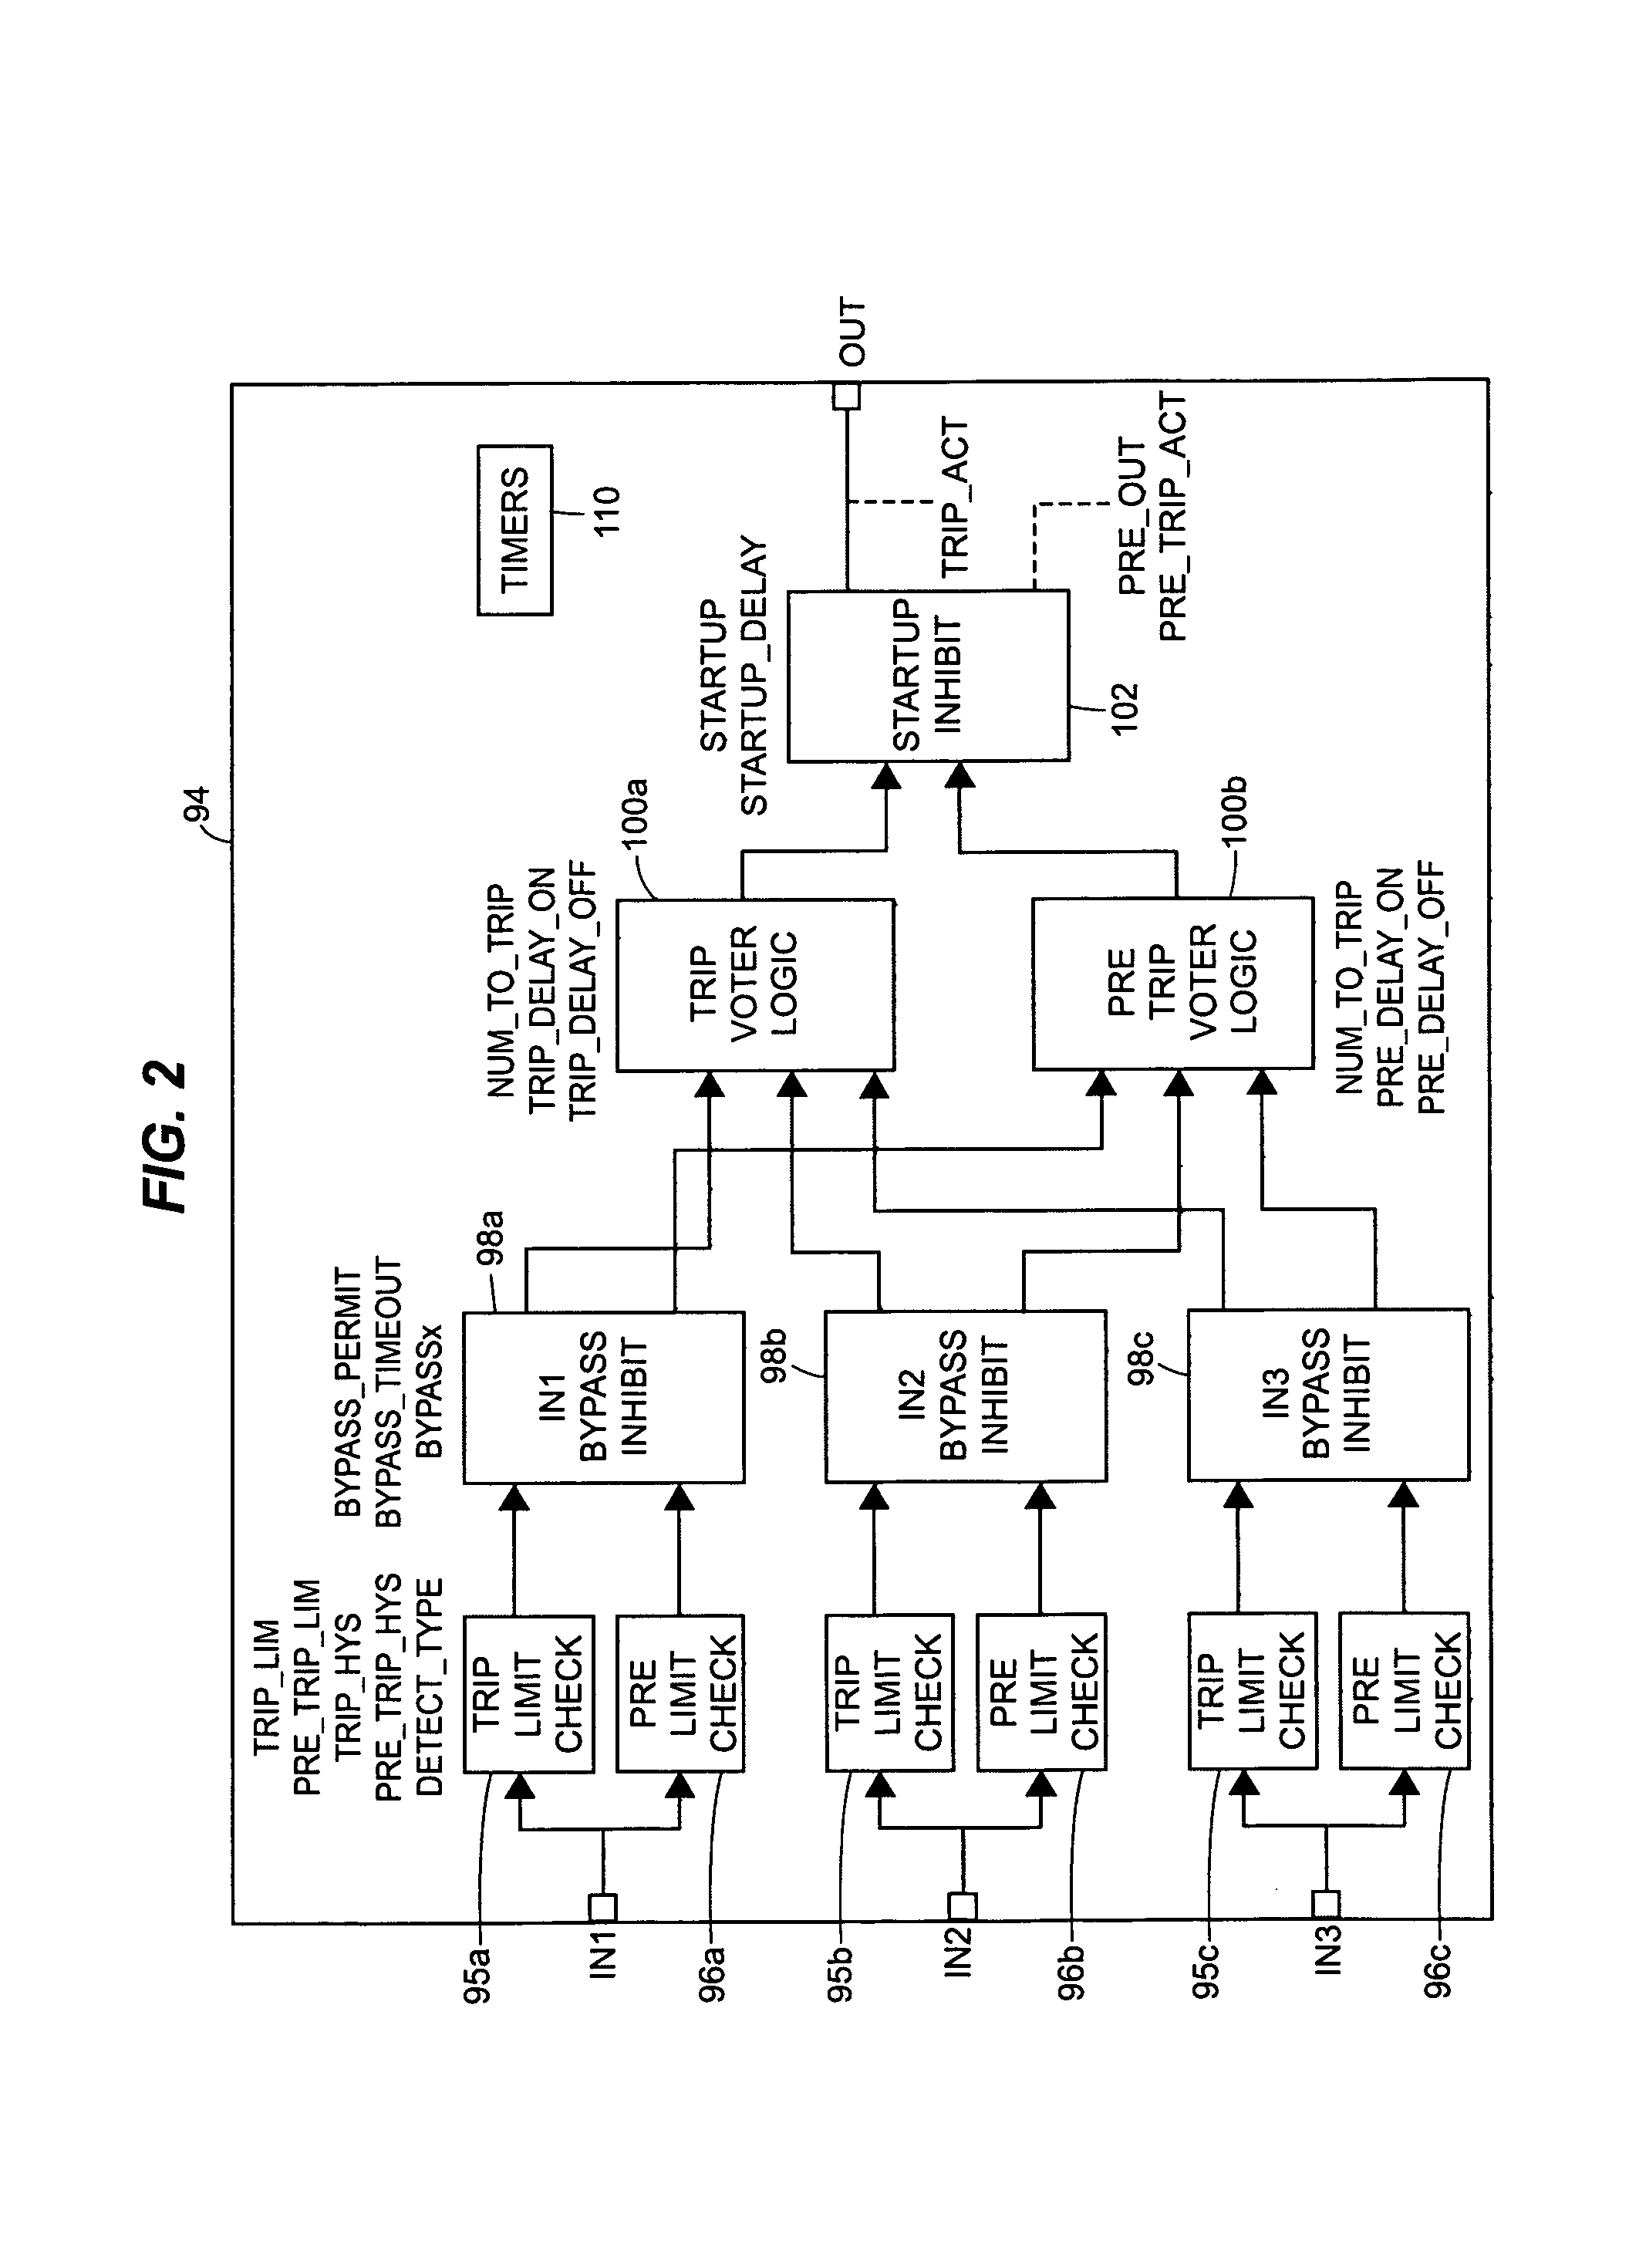 Voter logic block including operational and maintenance overrides in a process control system